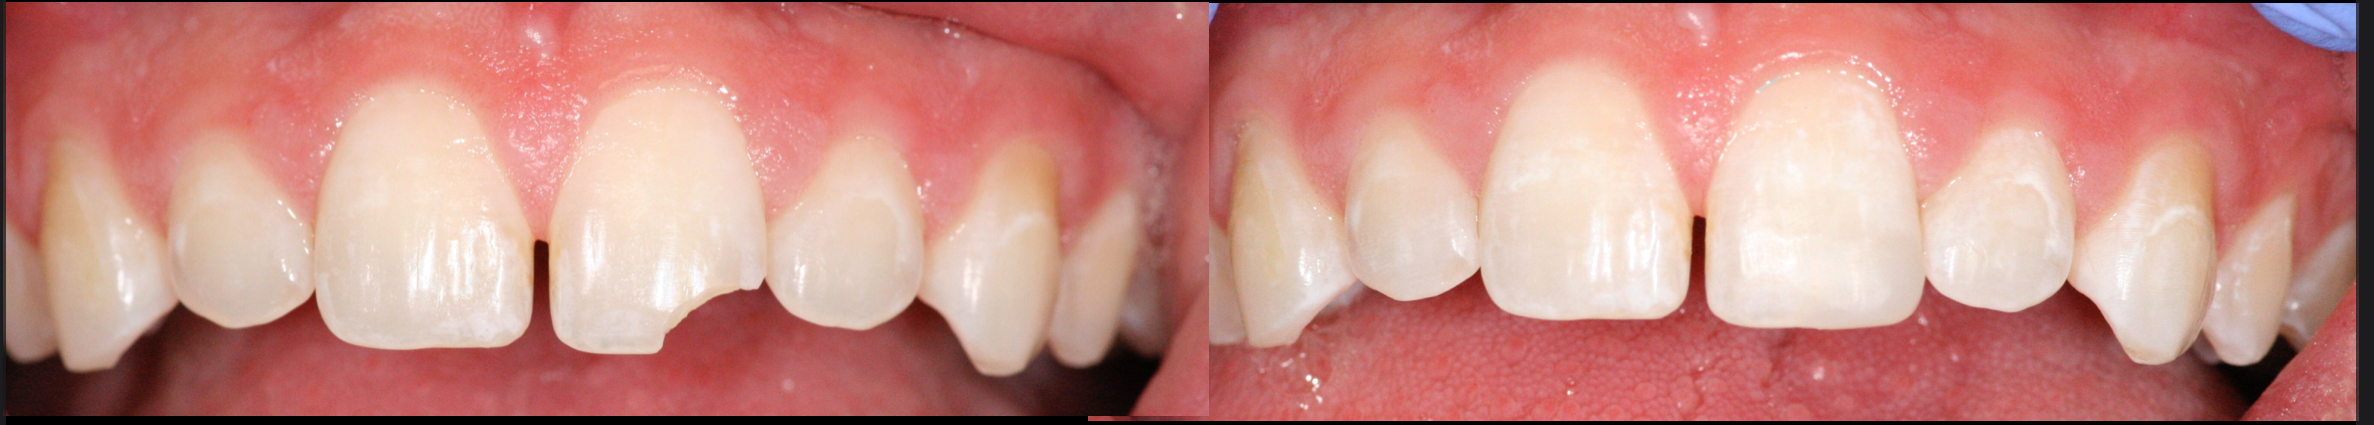 Chipped tooth repair